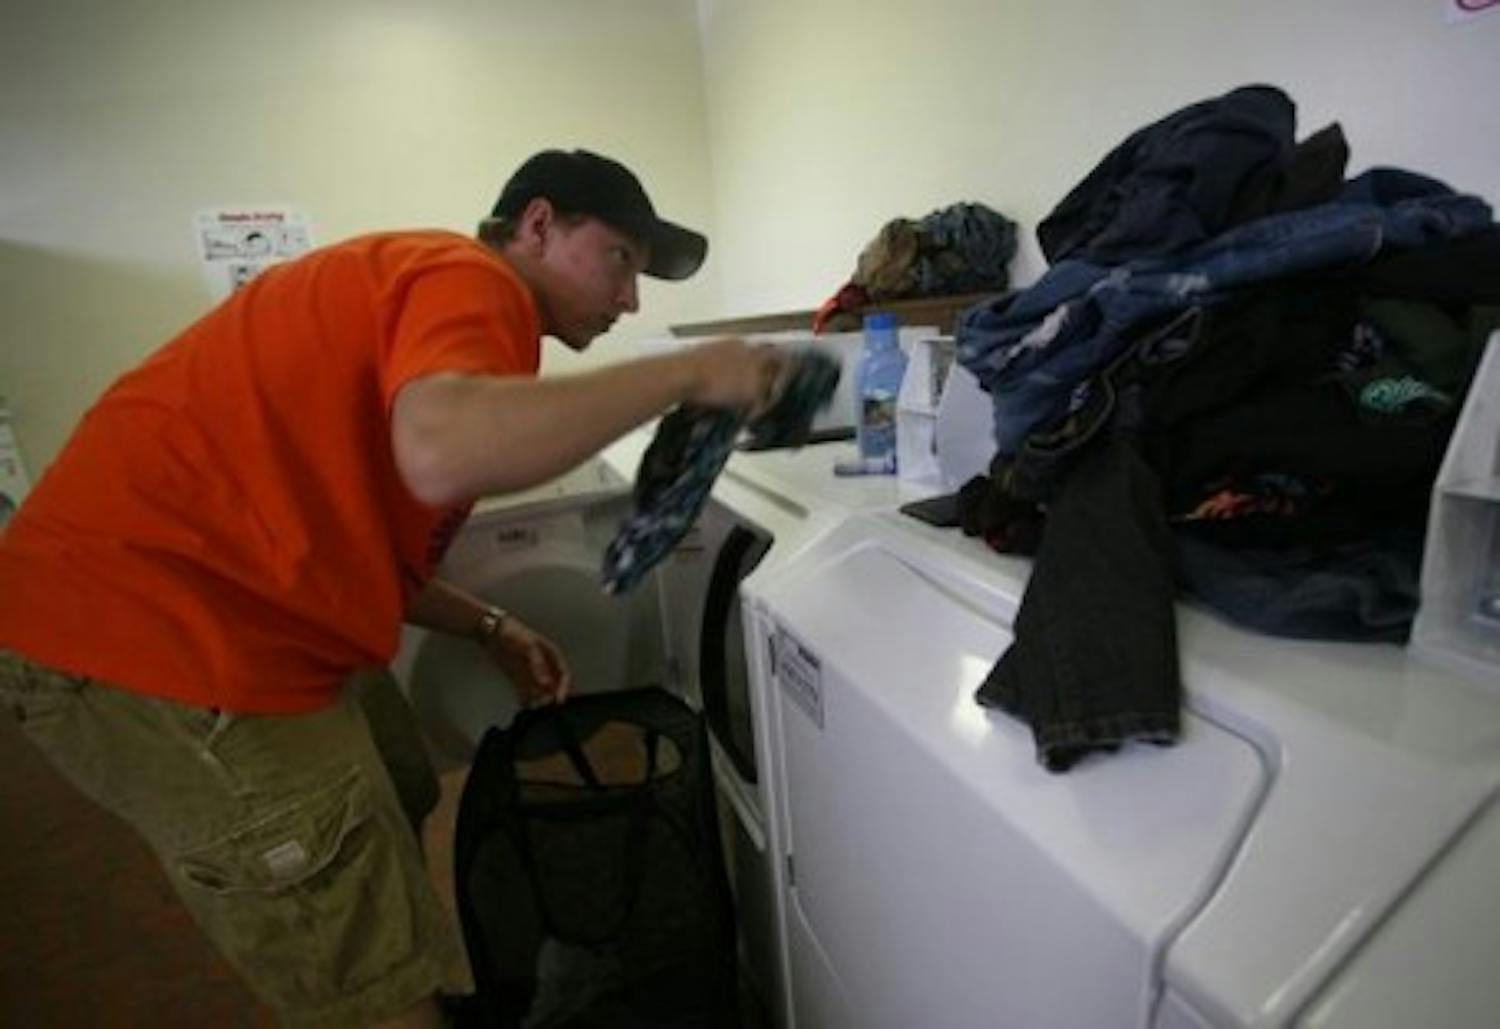 UF sophomore Chris Saunders separates his dark from his light clothes in the laundry room of Beaty Towers West on Thursday, Sept. 7, 2007.